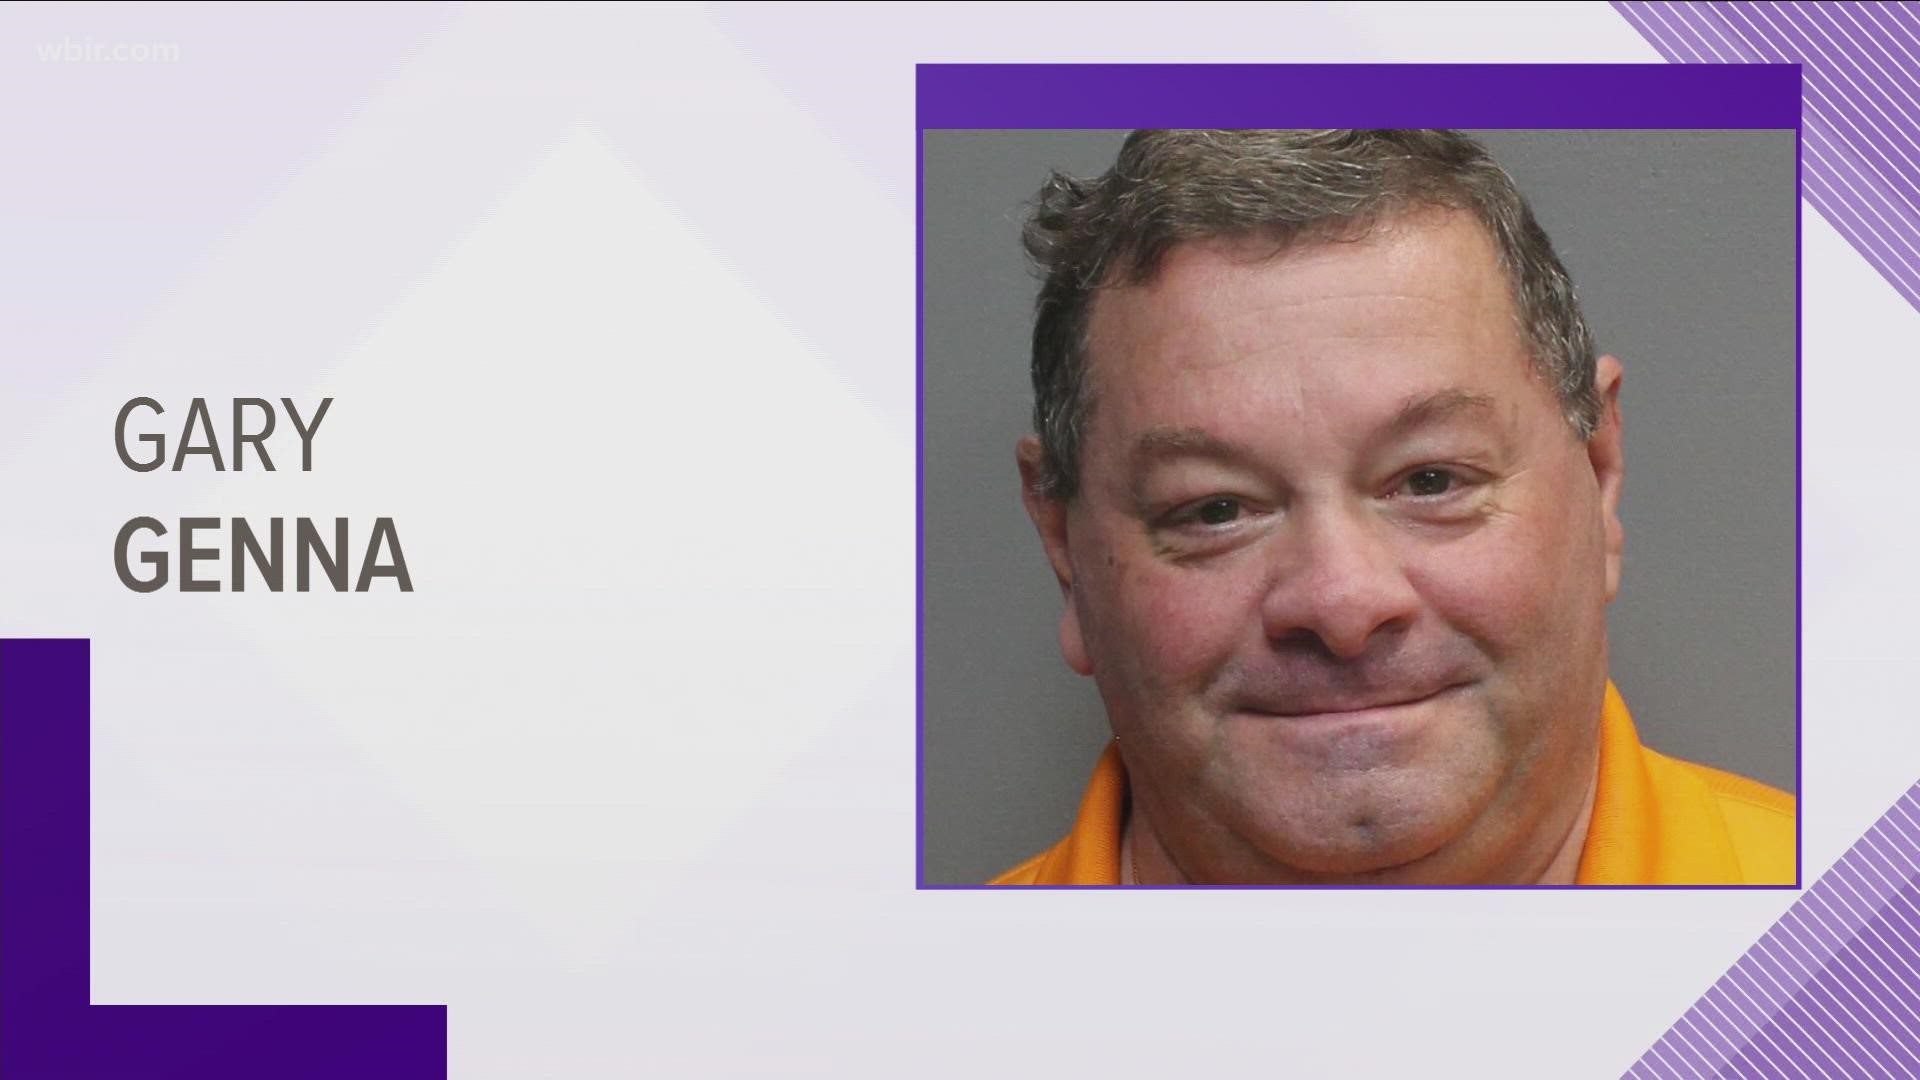 The Tennessee Massage Licensure Board said it suspended Gary Genna's license in March for sexual activity involving two former students.